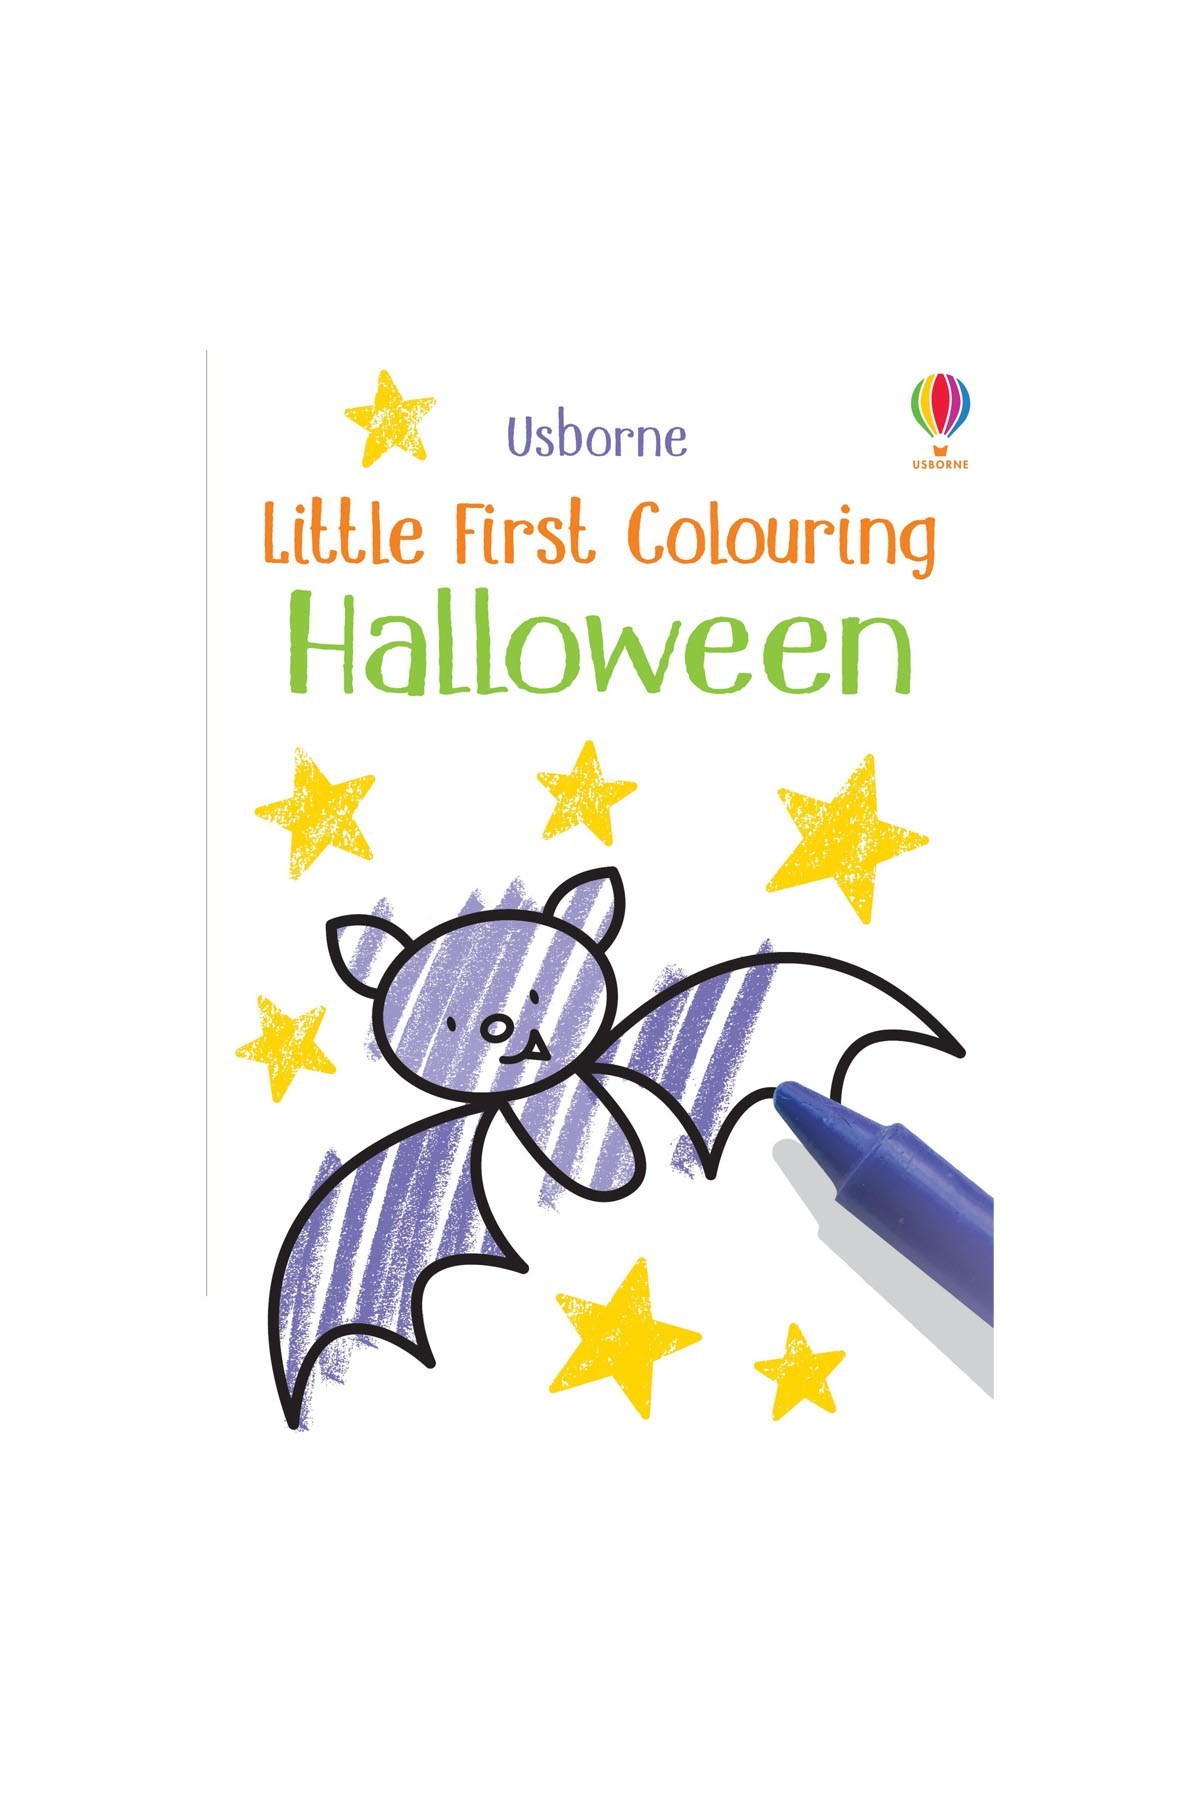 The Usborne Little First Colouring Halloween